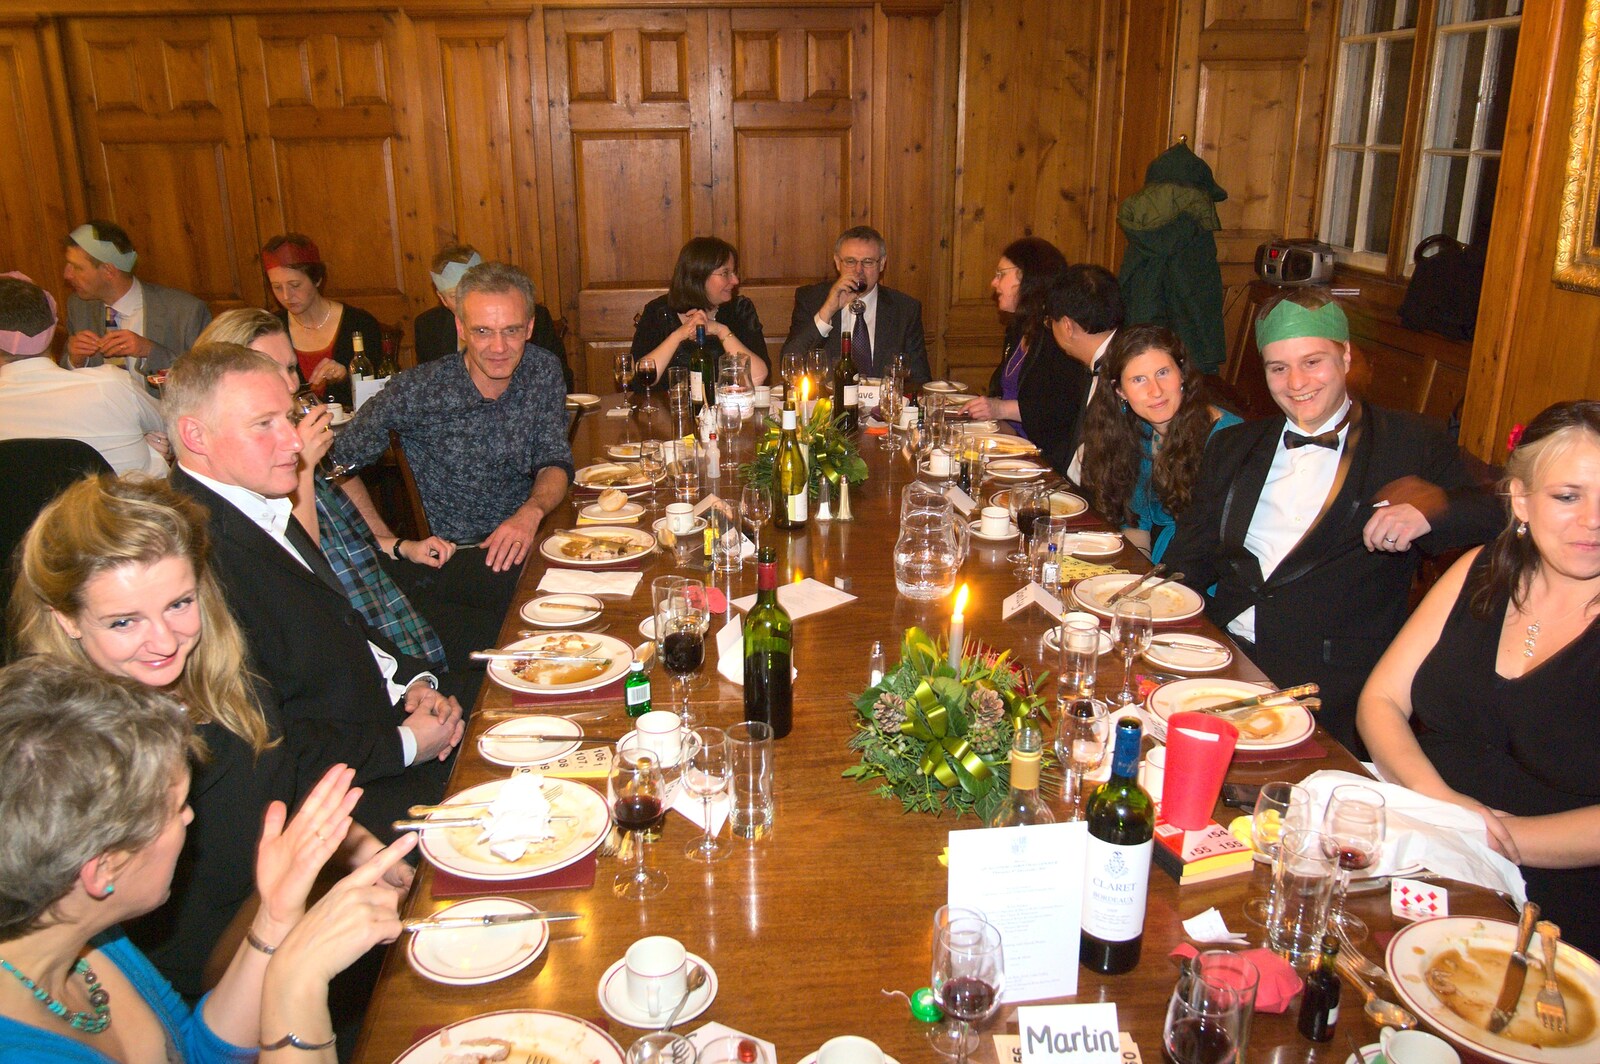 The top table from A Qualcomm Christmas, Christ's College, Cambridge - 8th December 2011